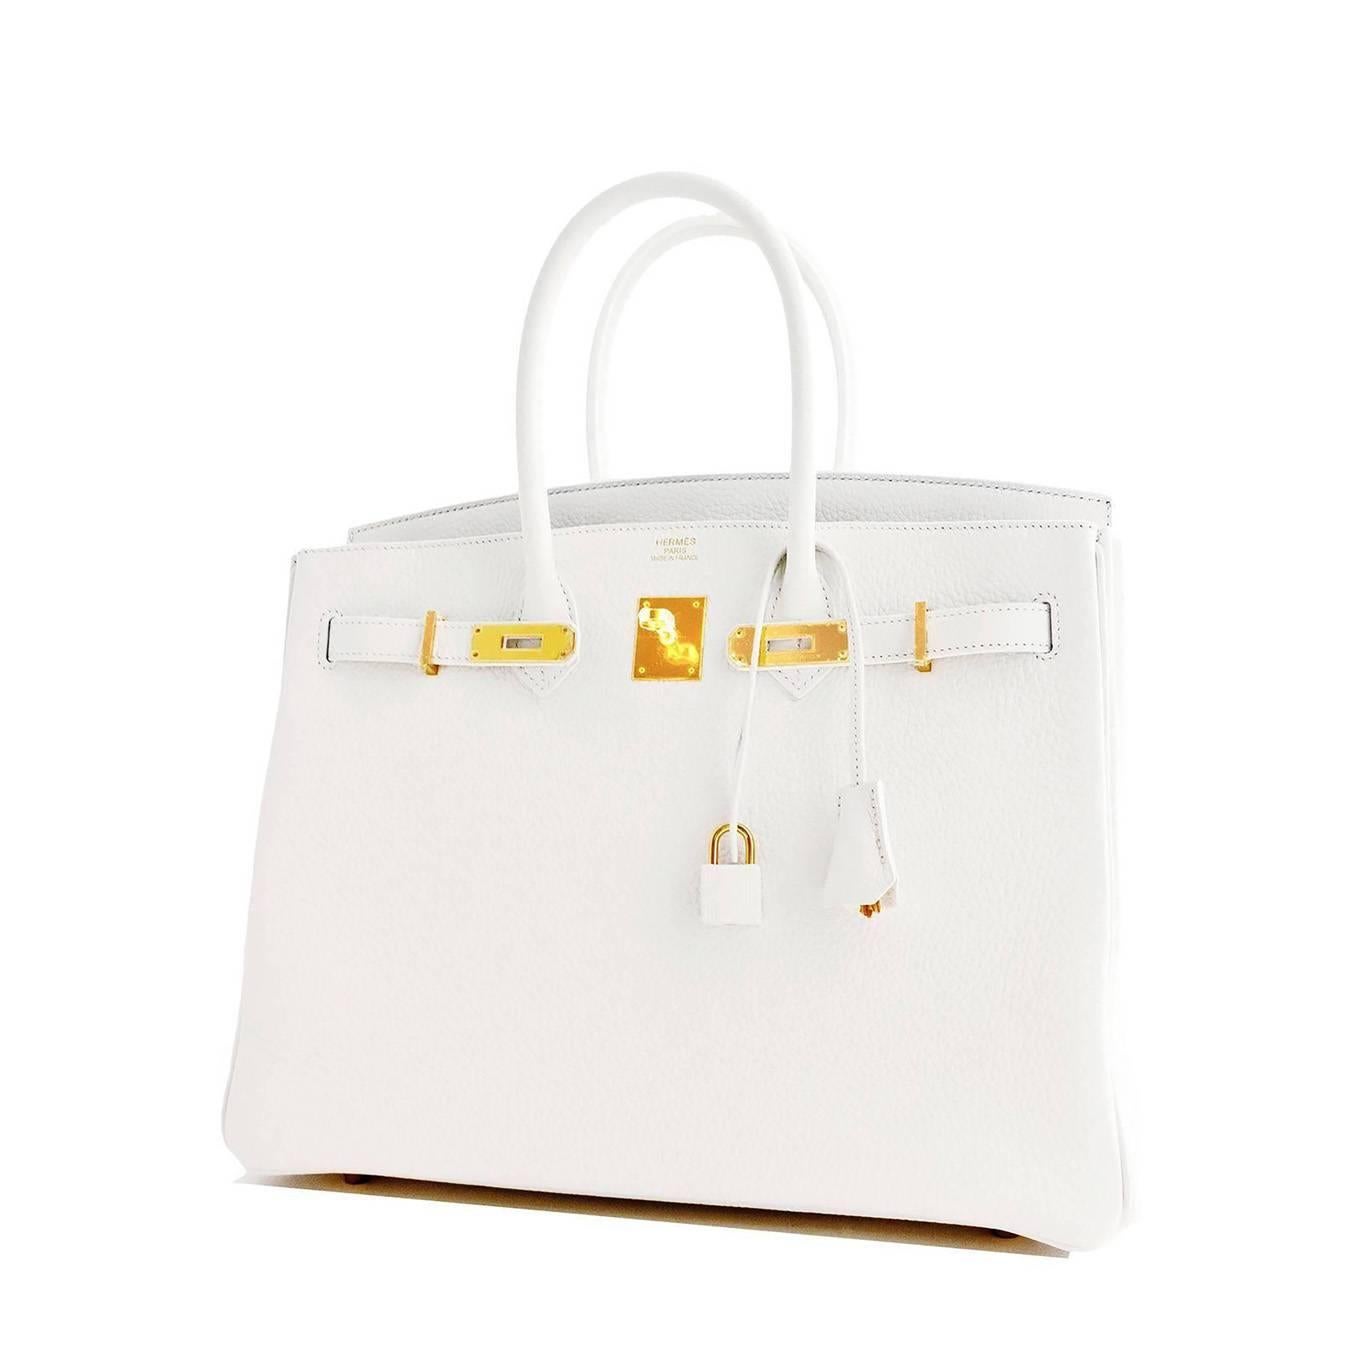 Hermes White 35cm Leather Birkin Gold Hardware New 2016 X Stamp 
Store fresh. Pristine condition (with plastic on hardware). 
Just purchased from Hermes store; bag bears new 2016 interior X Stamp.
Perfect gift! Comes full set with keys, lock,